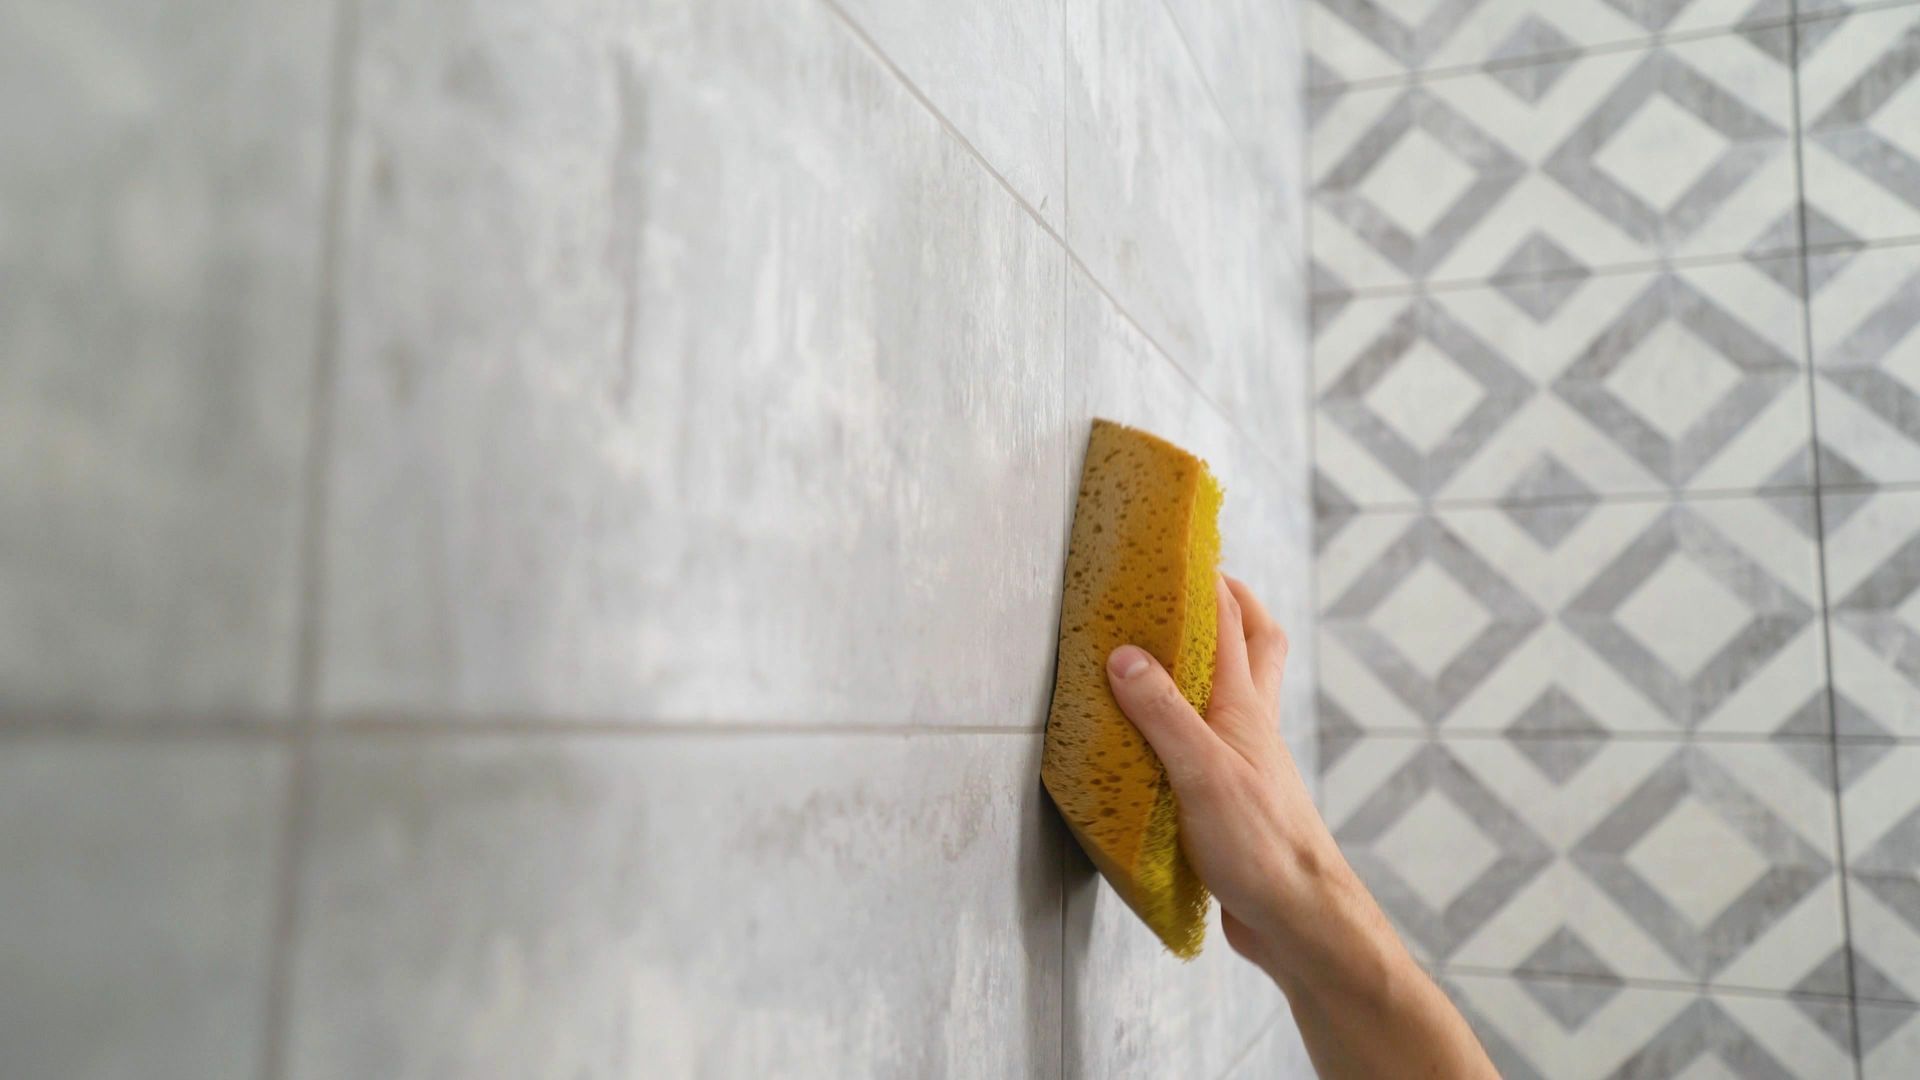 A person is cleaning a tiled wall with a sponge.